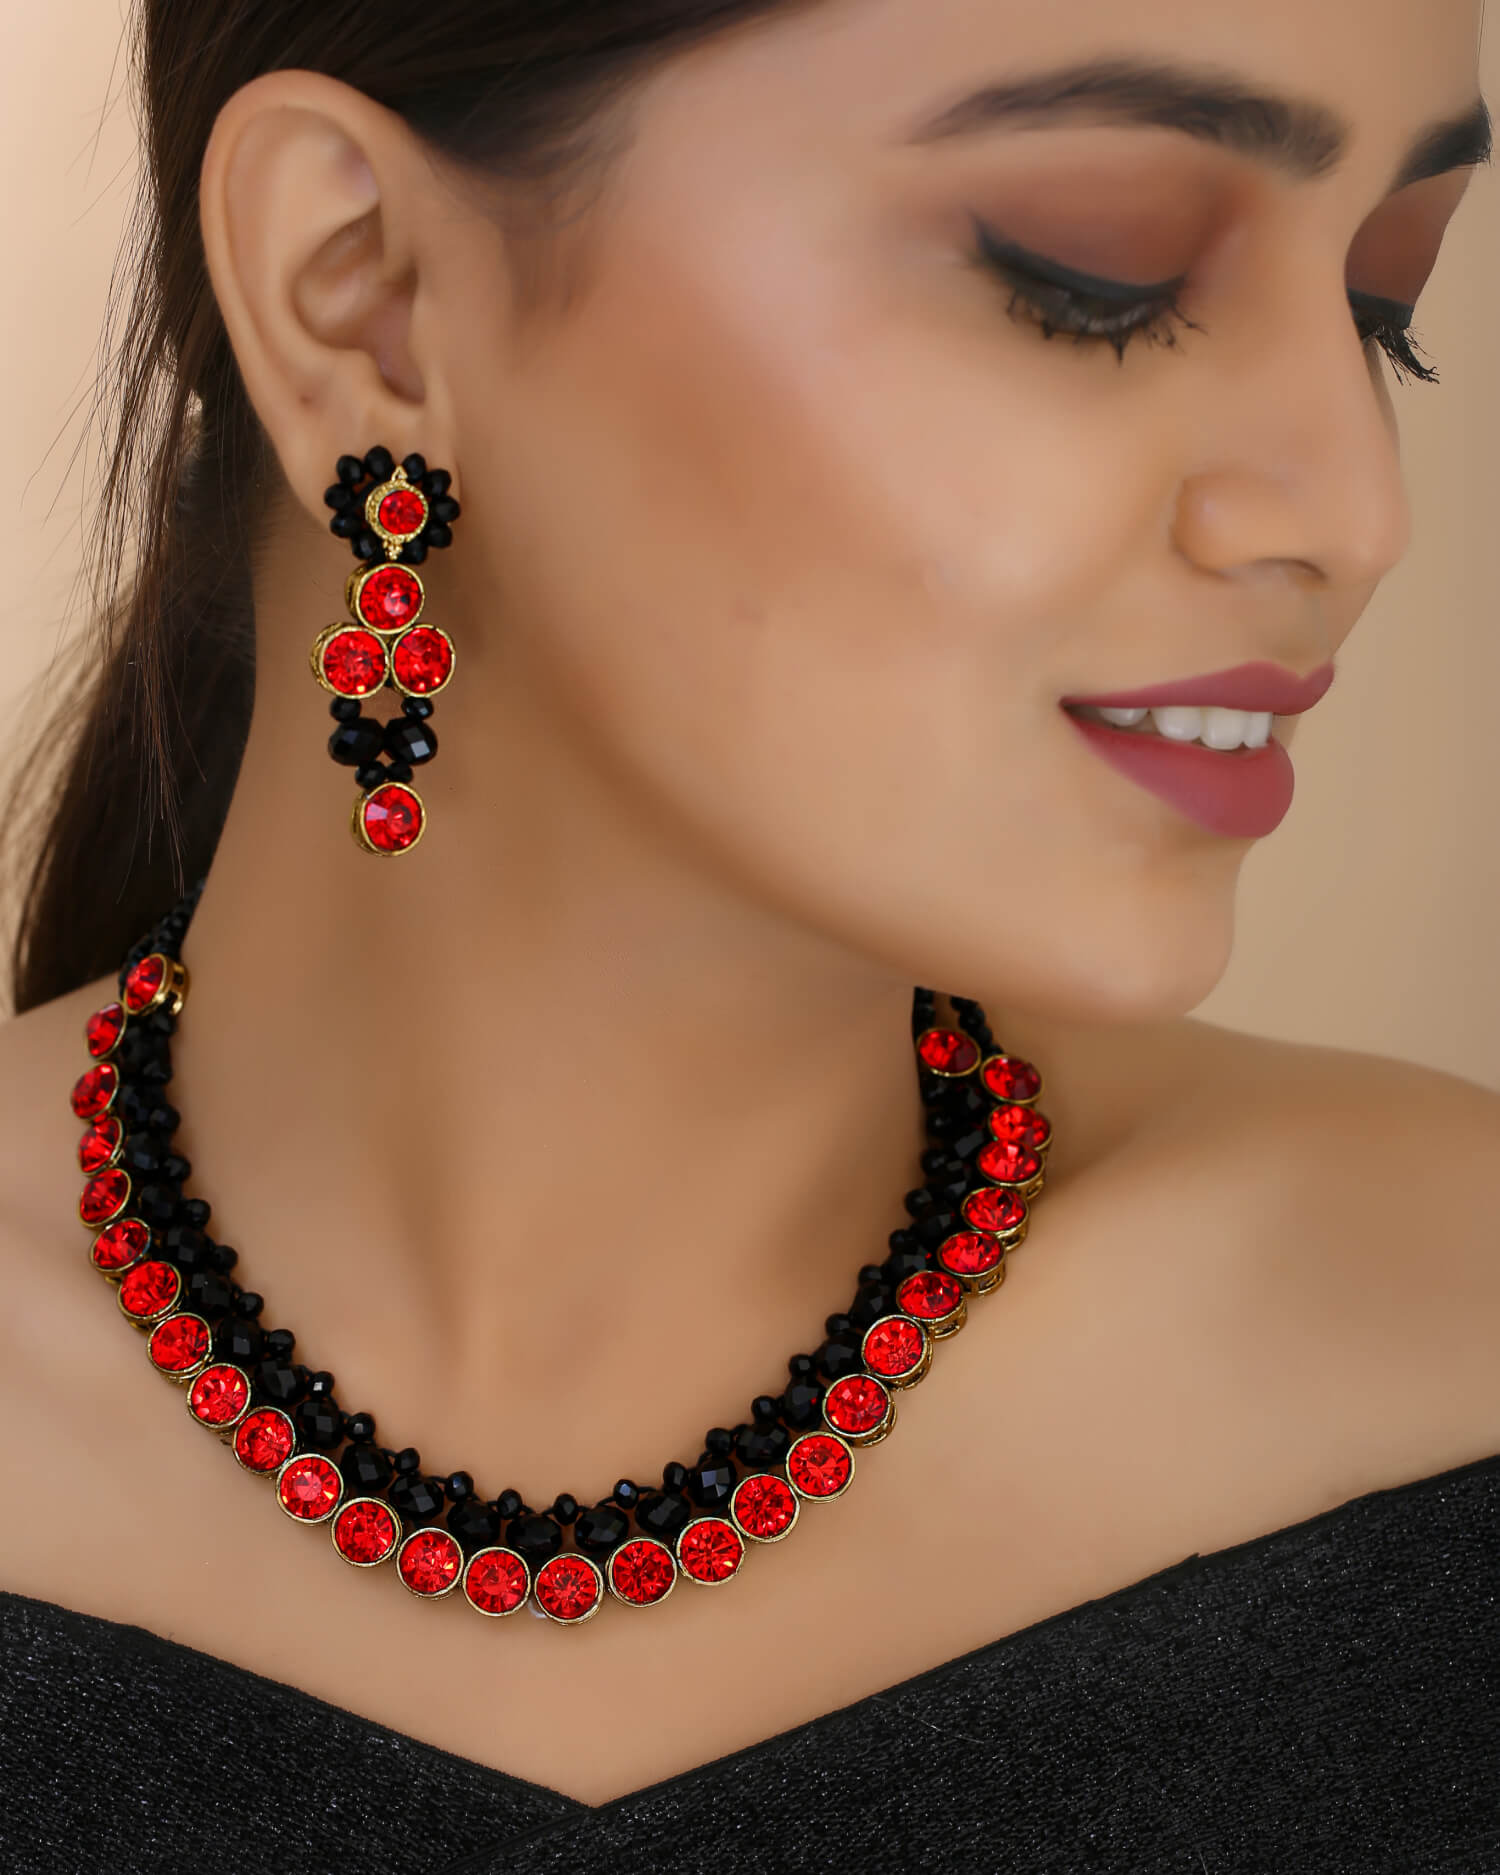 Black Necklace Sets Online Shopping for Women at Low Prices